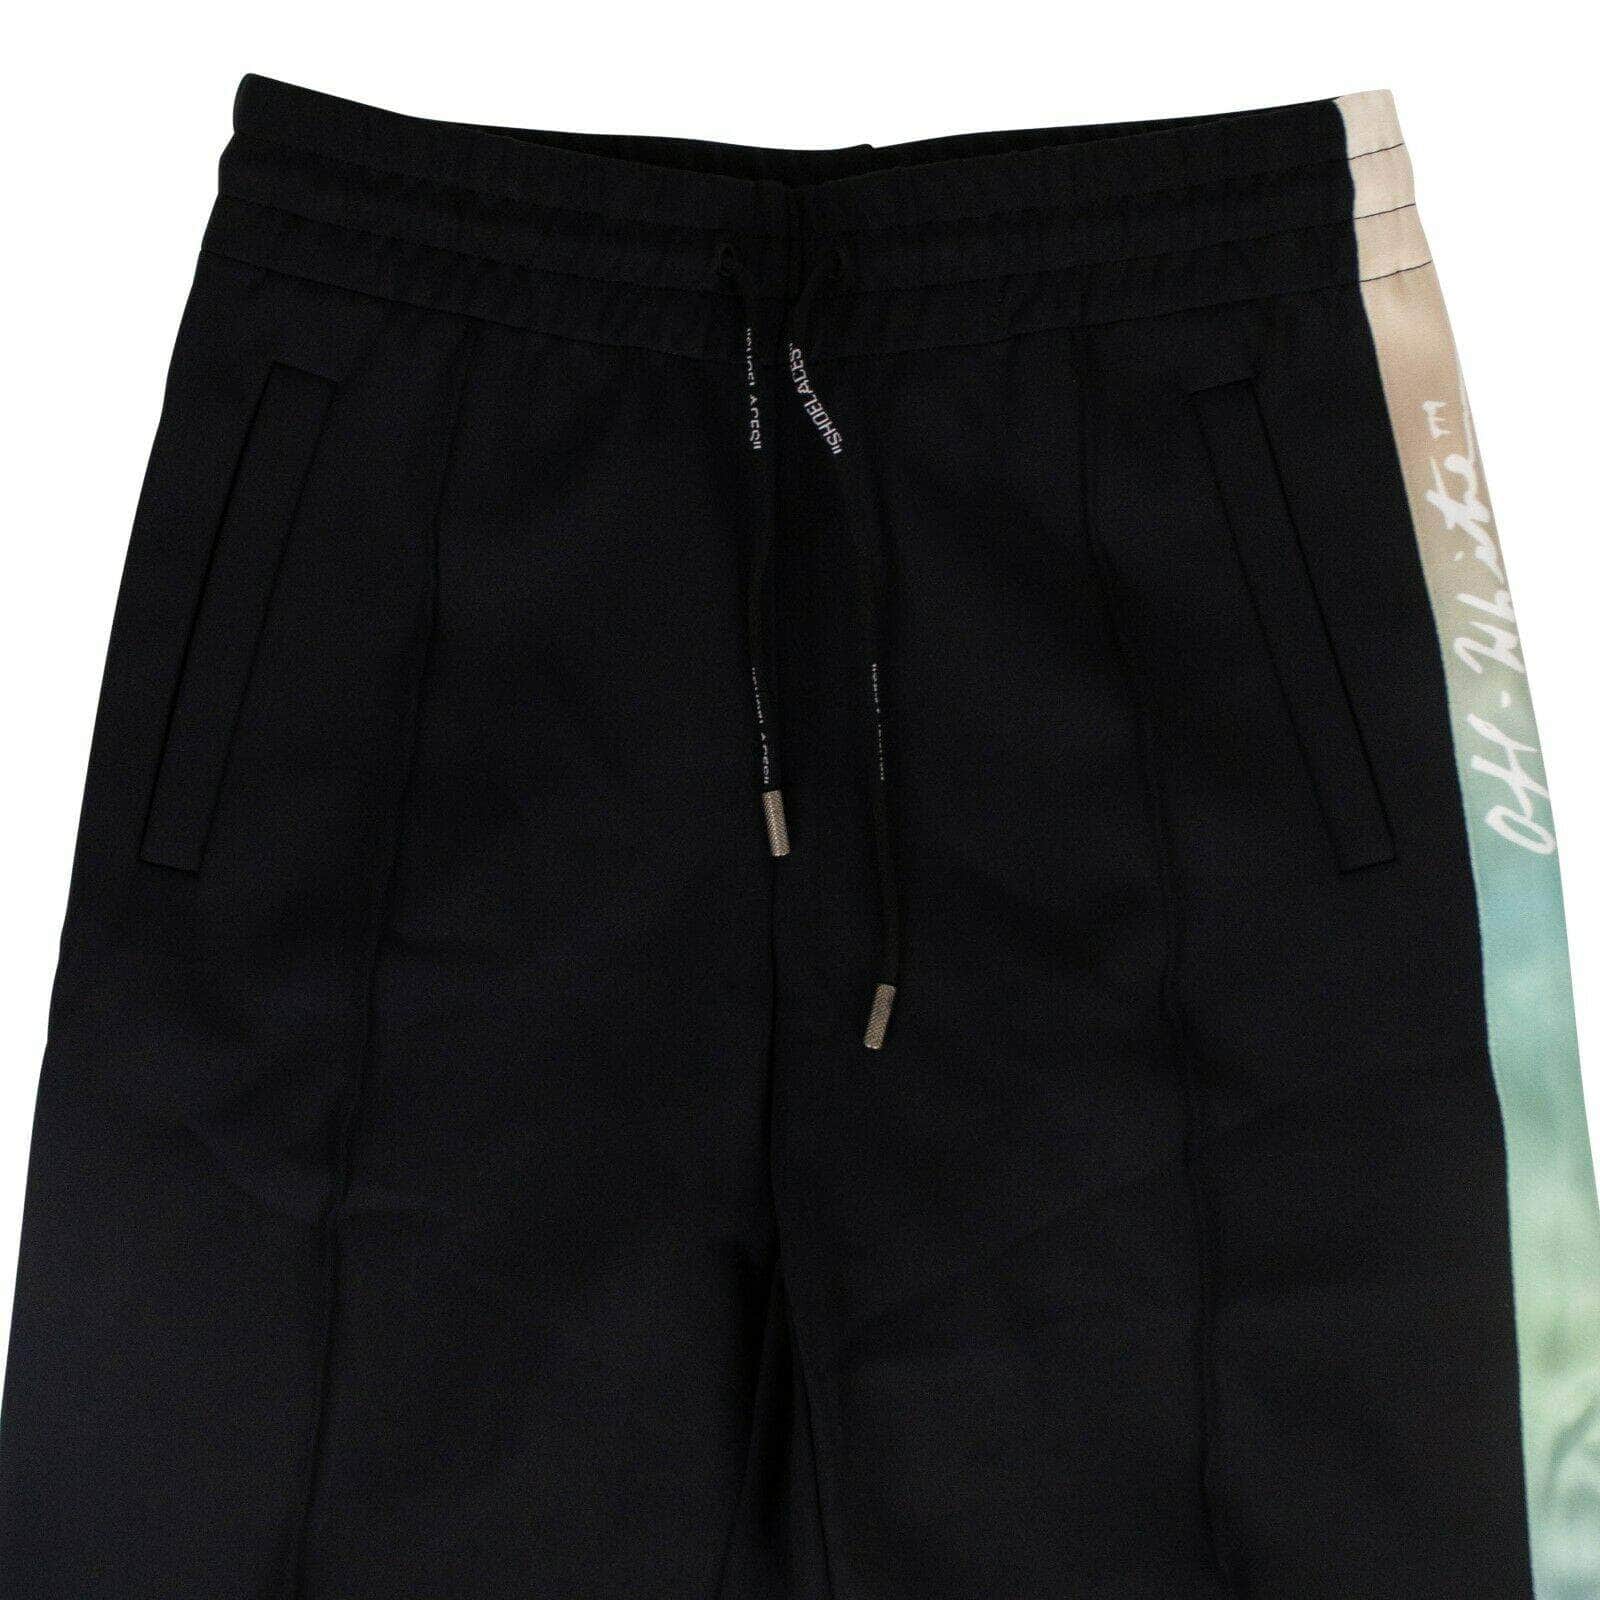 OFF-WHITE c/o VIRGIL ABLOH 250-500, chicmi, couponcollection, gender-womens, july4th, main-clothing, off-white, off-white-c-o-virgil-abloh, OFW2, owjuly4, OWW, pant, size-xs, SPO XS Side Paneled Track Pants - Black 89OW-1366/XS 89OW-1366/XS